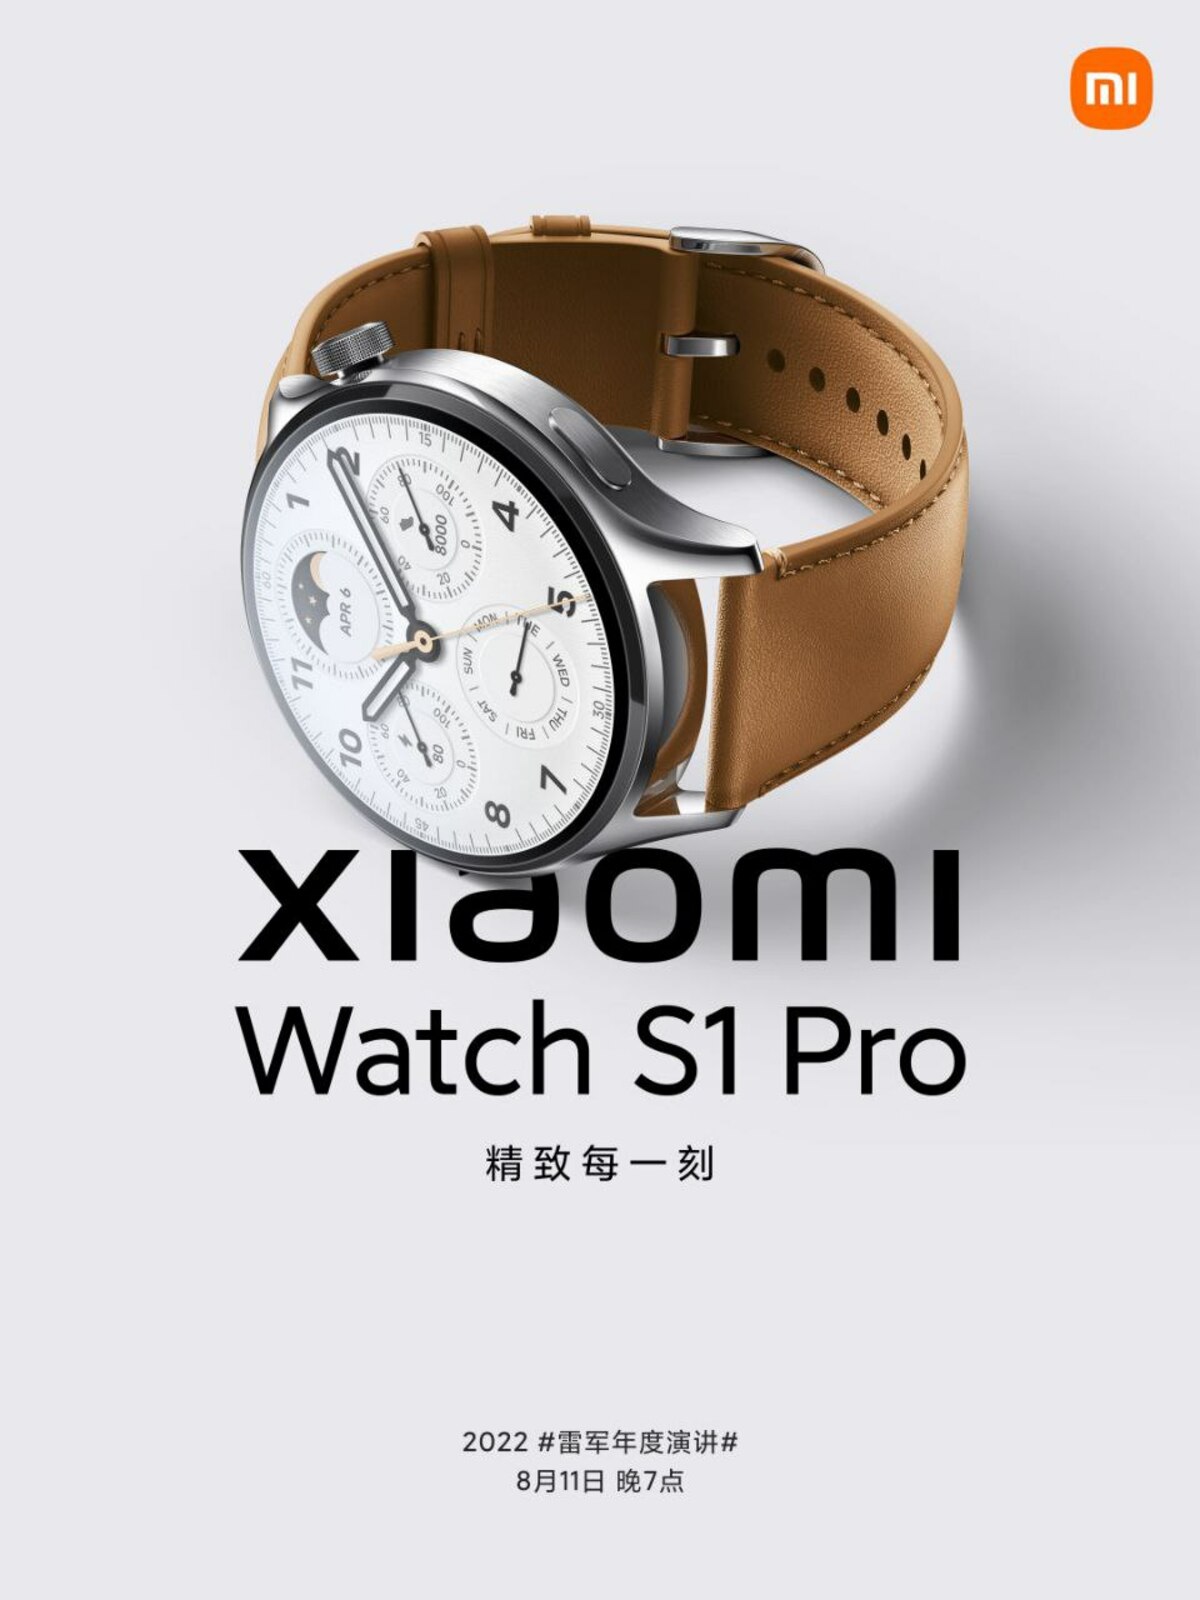 The Xiaomi Watch S1 Pro is revealed as both a stylish and